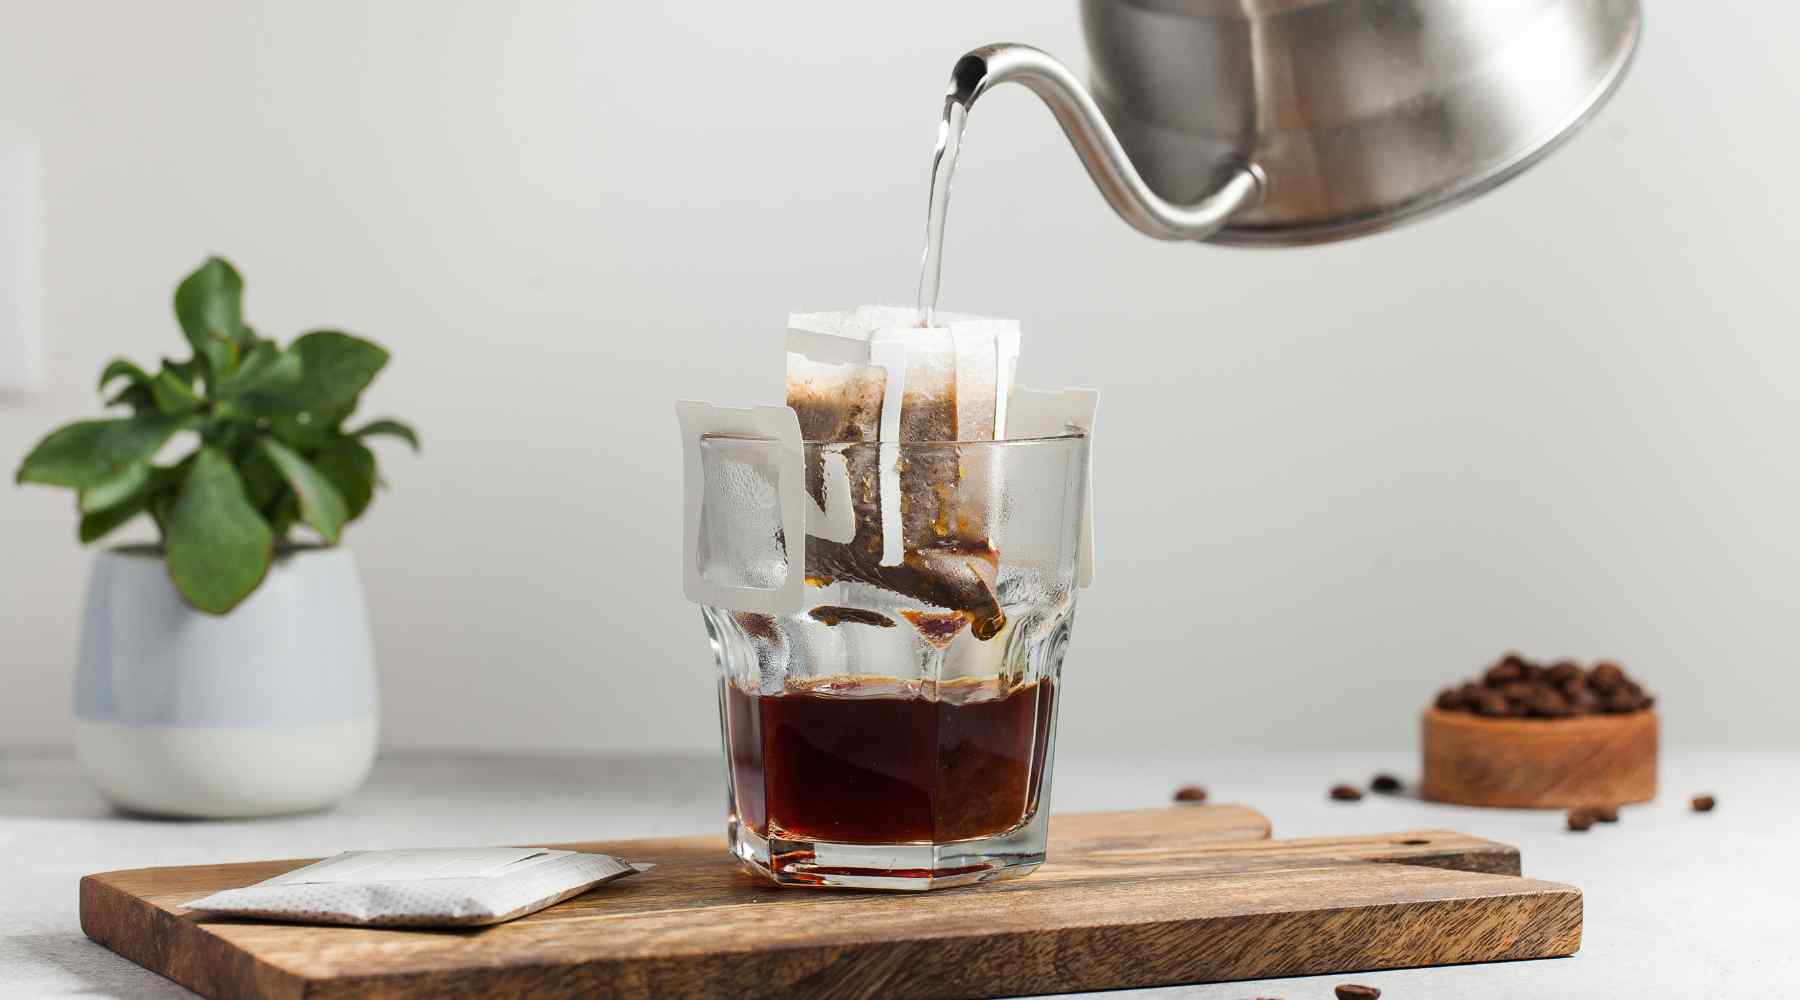 Shop Easy Cold Brew Coffee Brew Bags